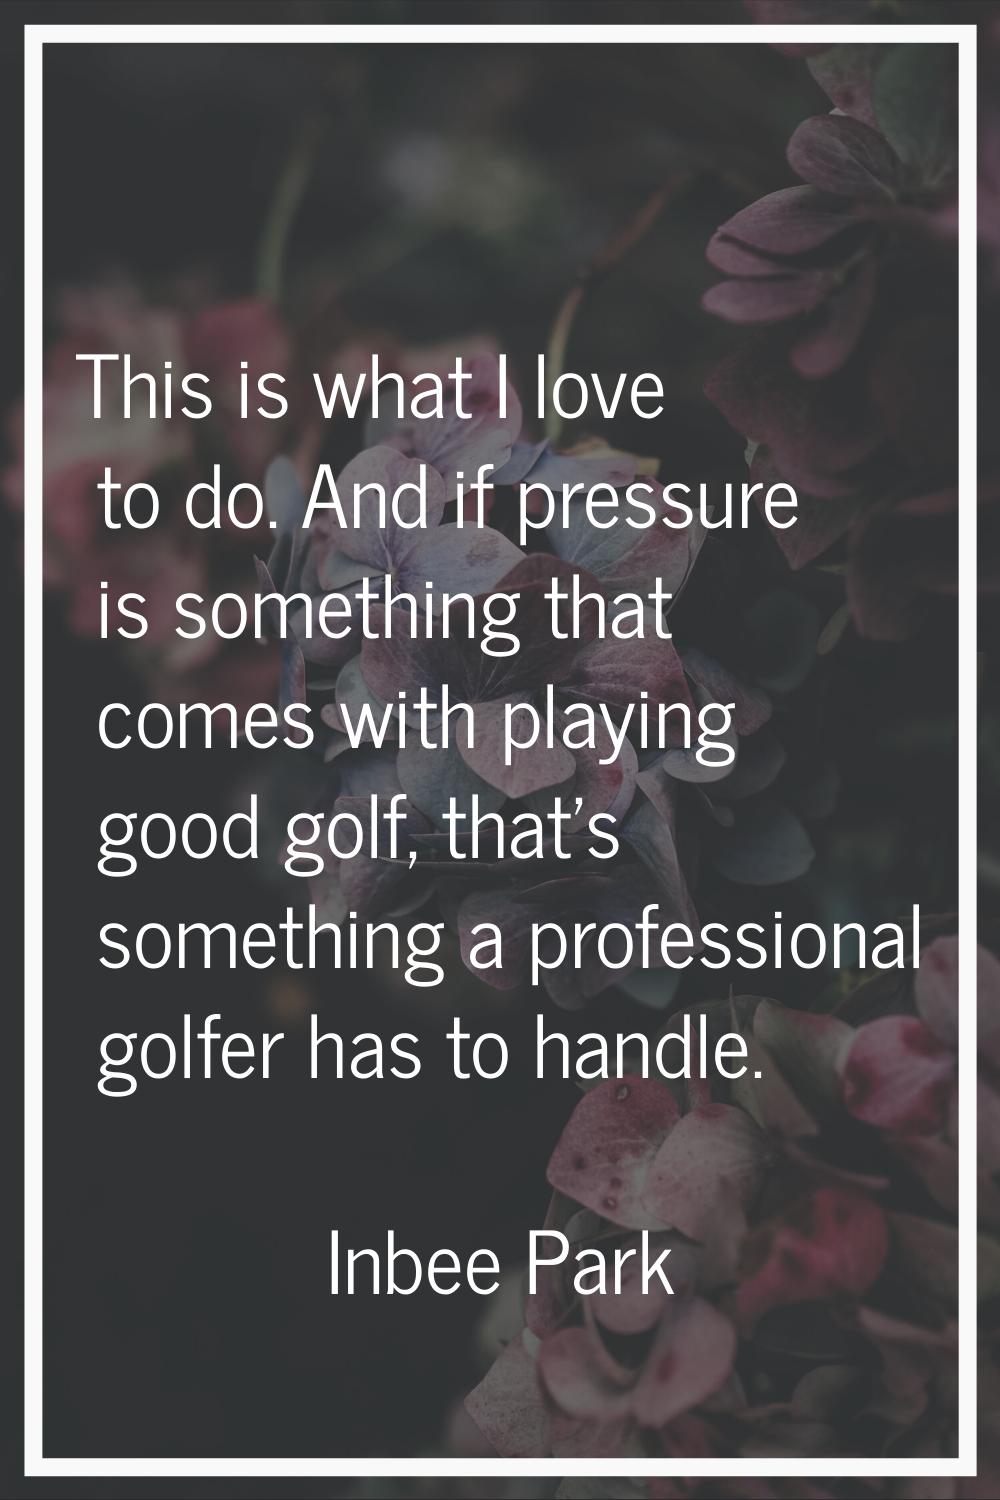 This is what I love to do. And if pressure is something that comes with playing good golf, that's s